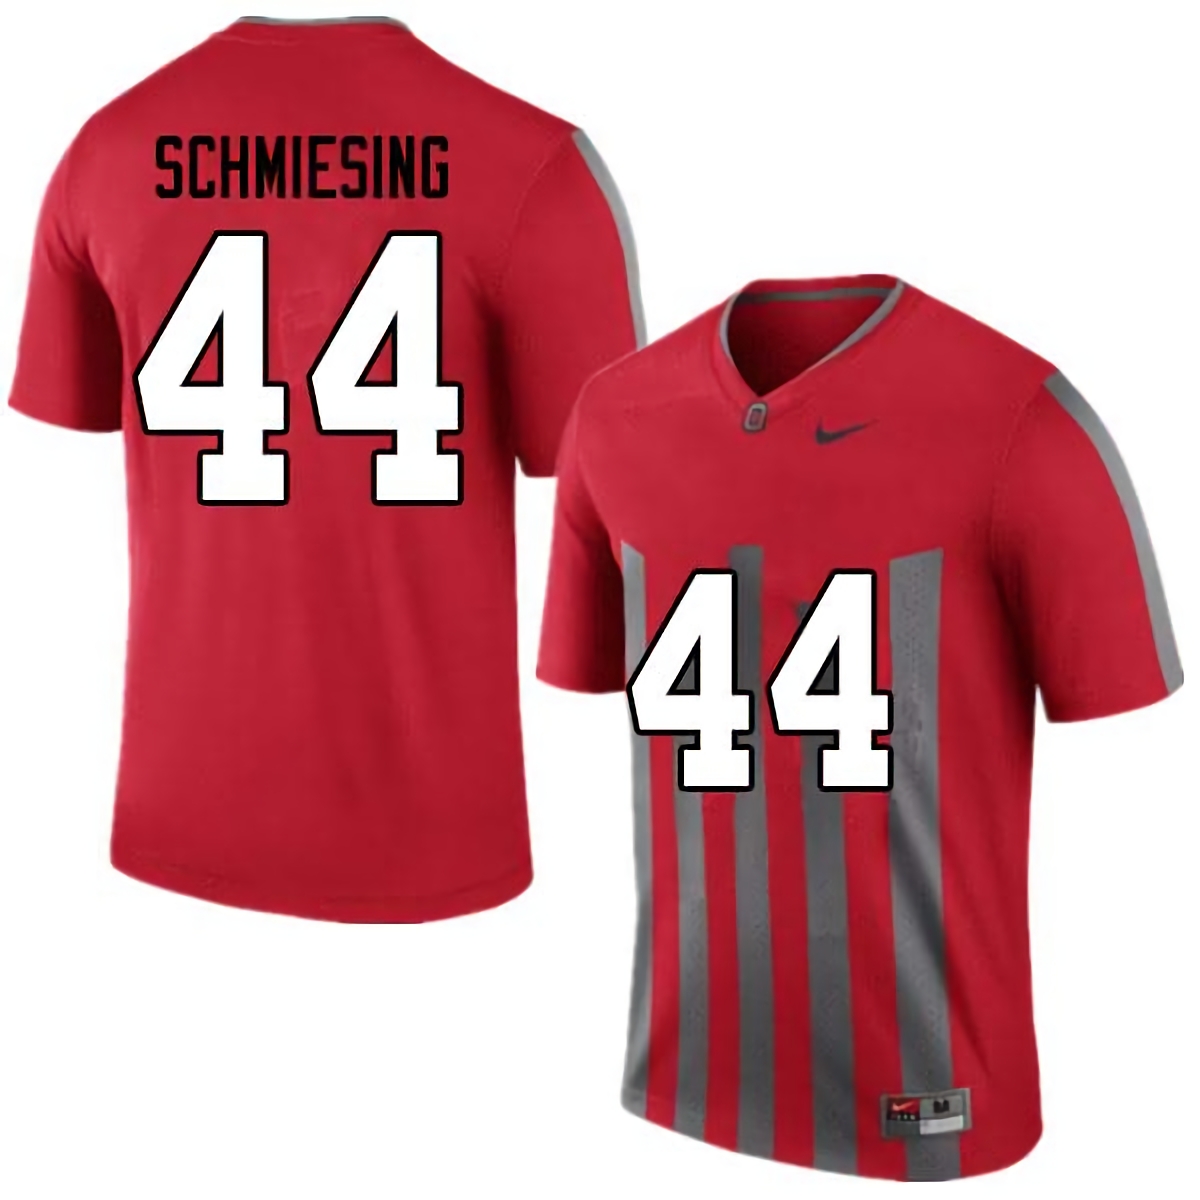 Ben Schmiesing Ohio State Buckeyes Men's NCAA #44 Nike Throwback Red College Stitched Football Jersey HSW2556XR